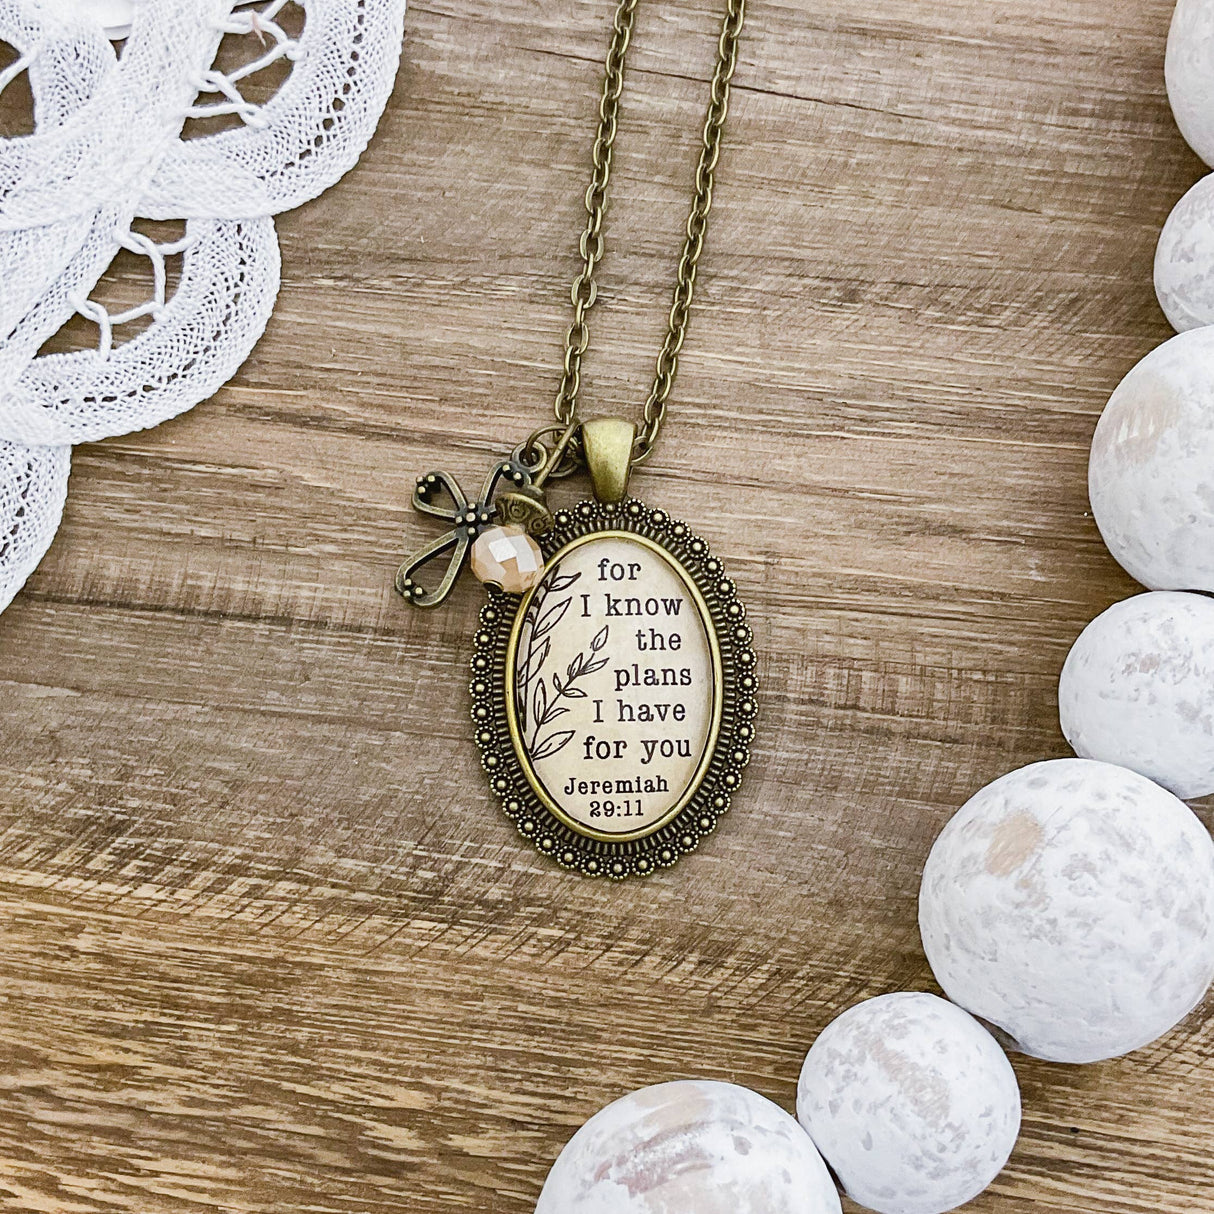 For I know the plans I have for you - Jeremiah 29:11 pendant